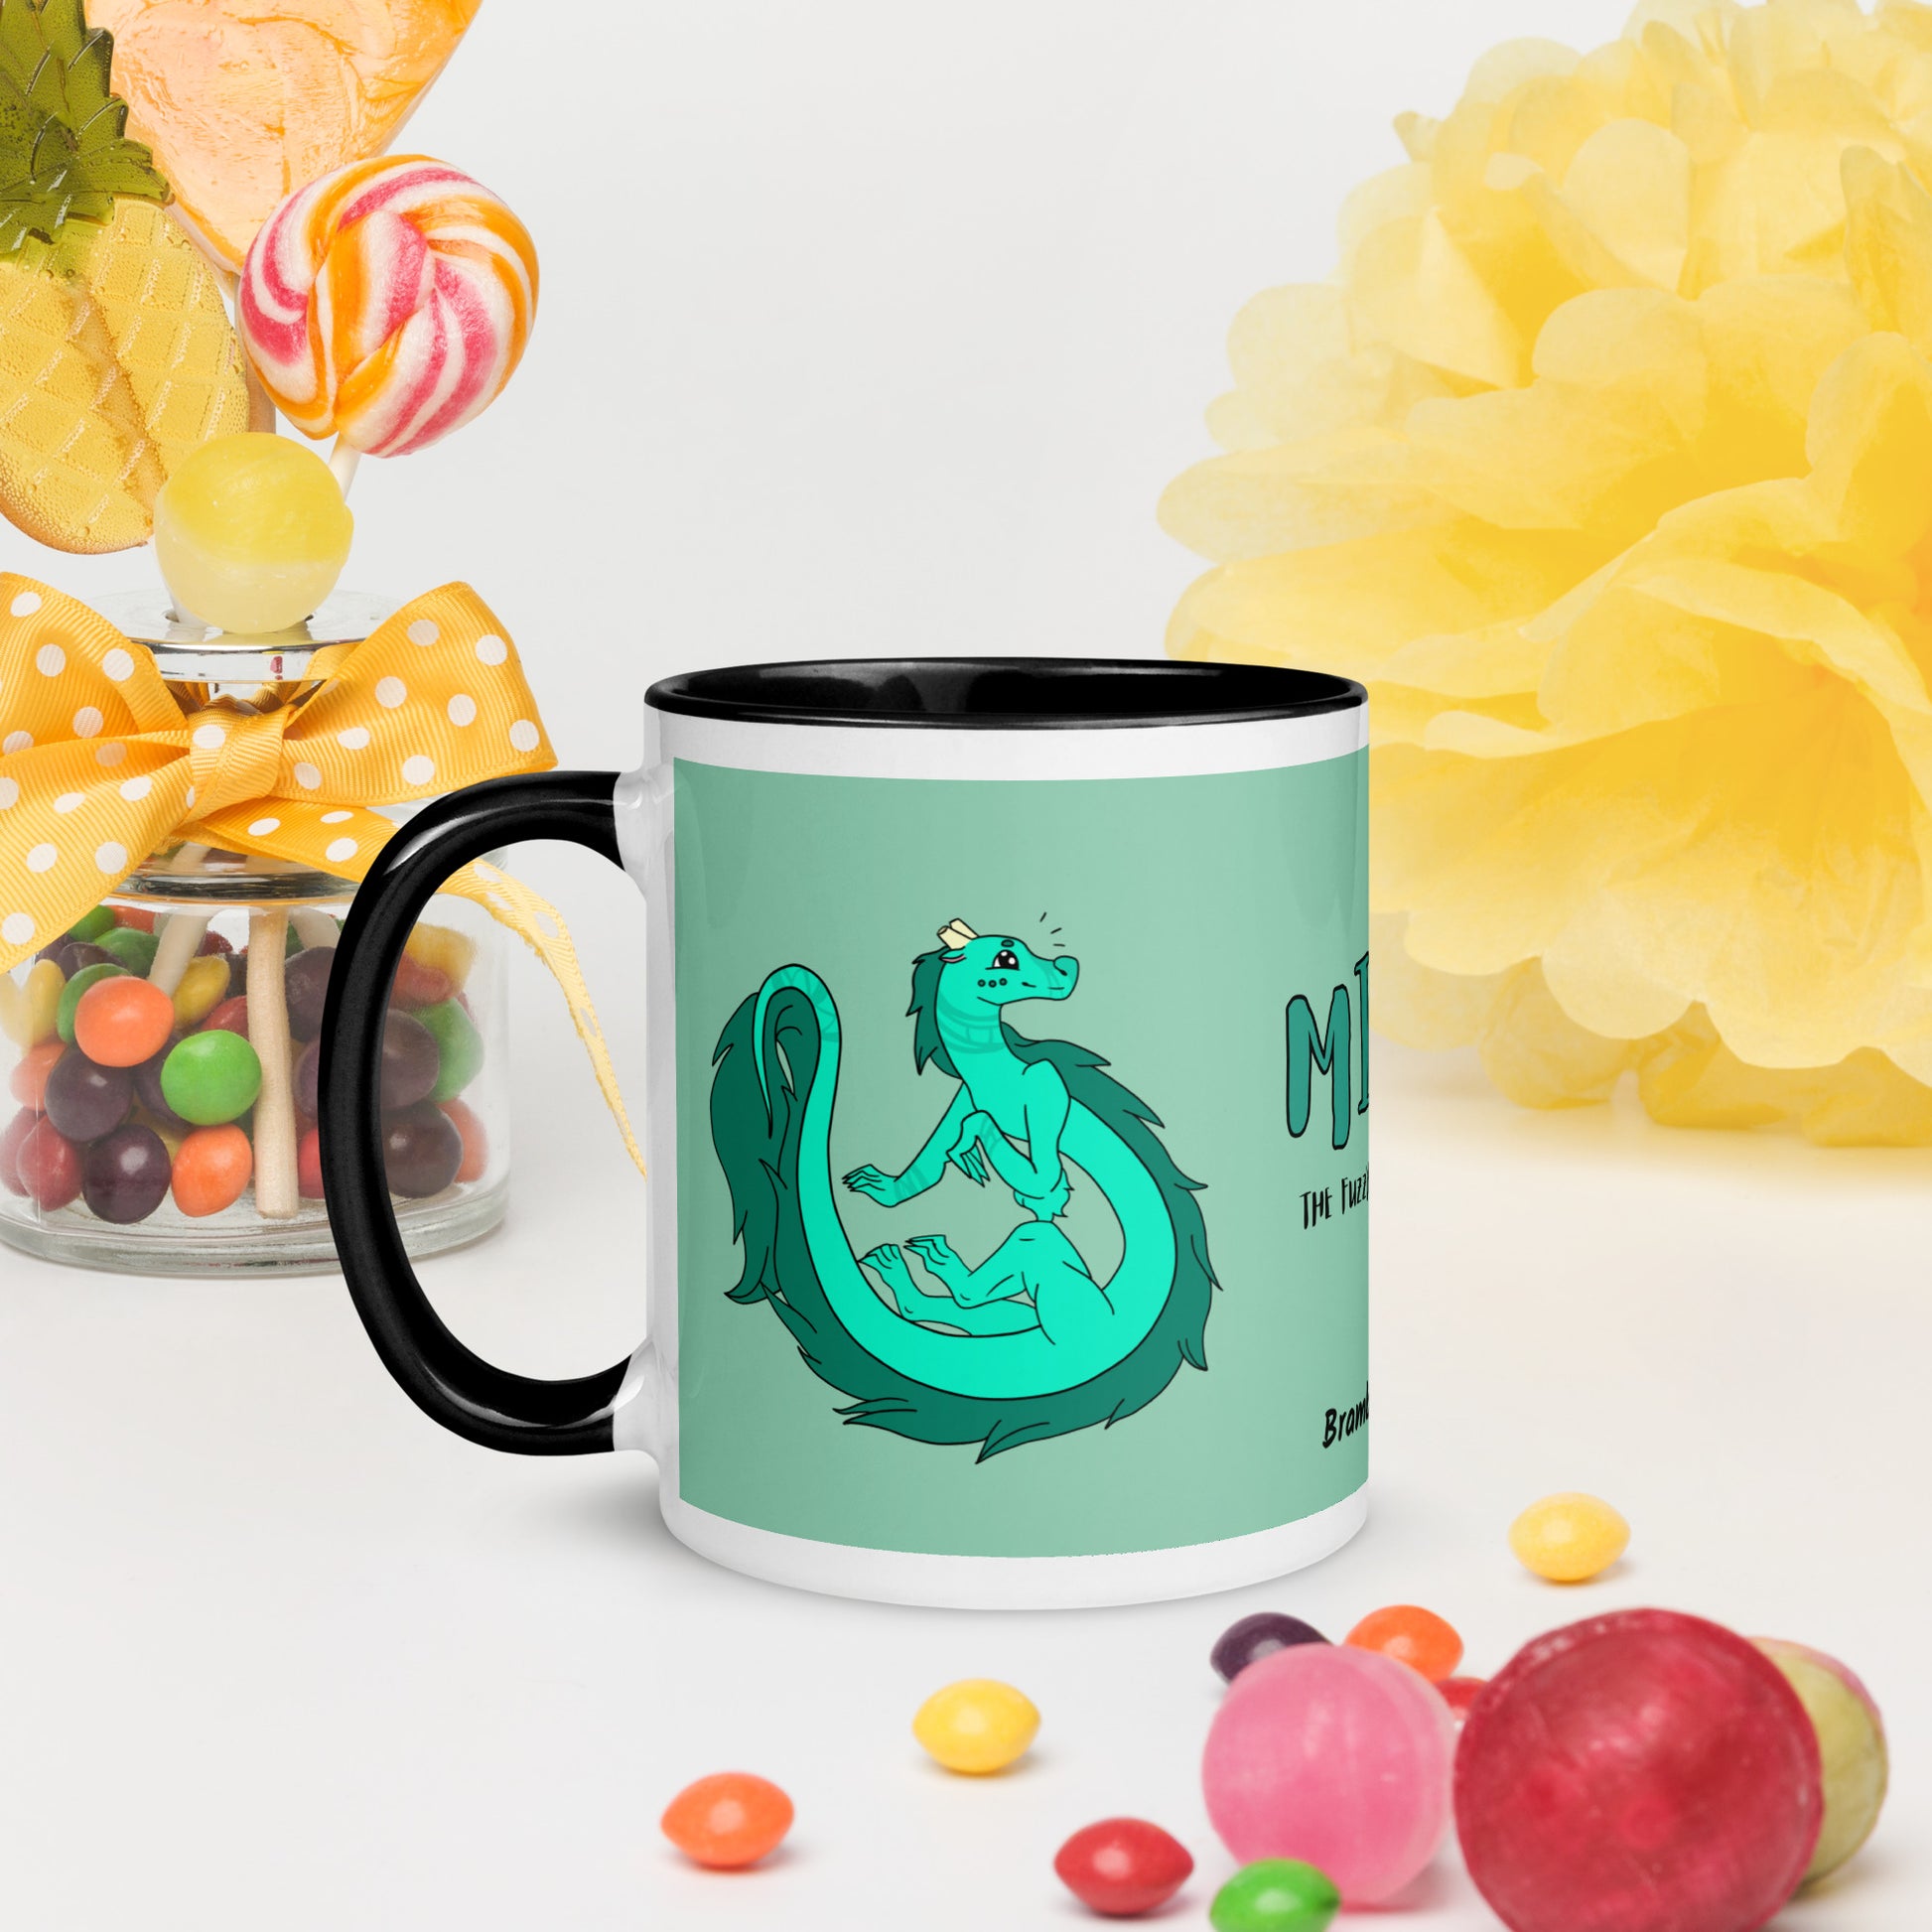 11 ounce white ceramic mug. Black inside and handle. Features double-sided image of Minty the Fuzzy Noodle Dragon on a green background. Shown on tabletop by candy and decorations.